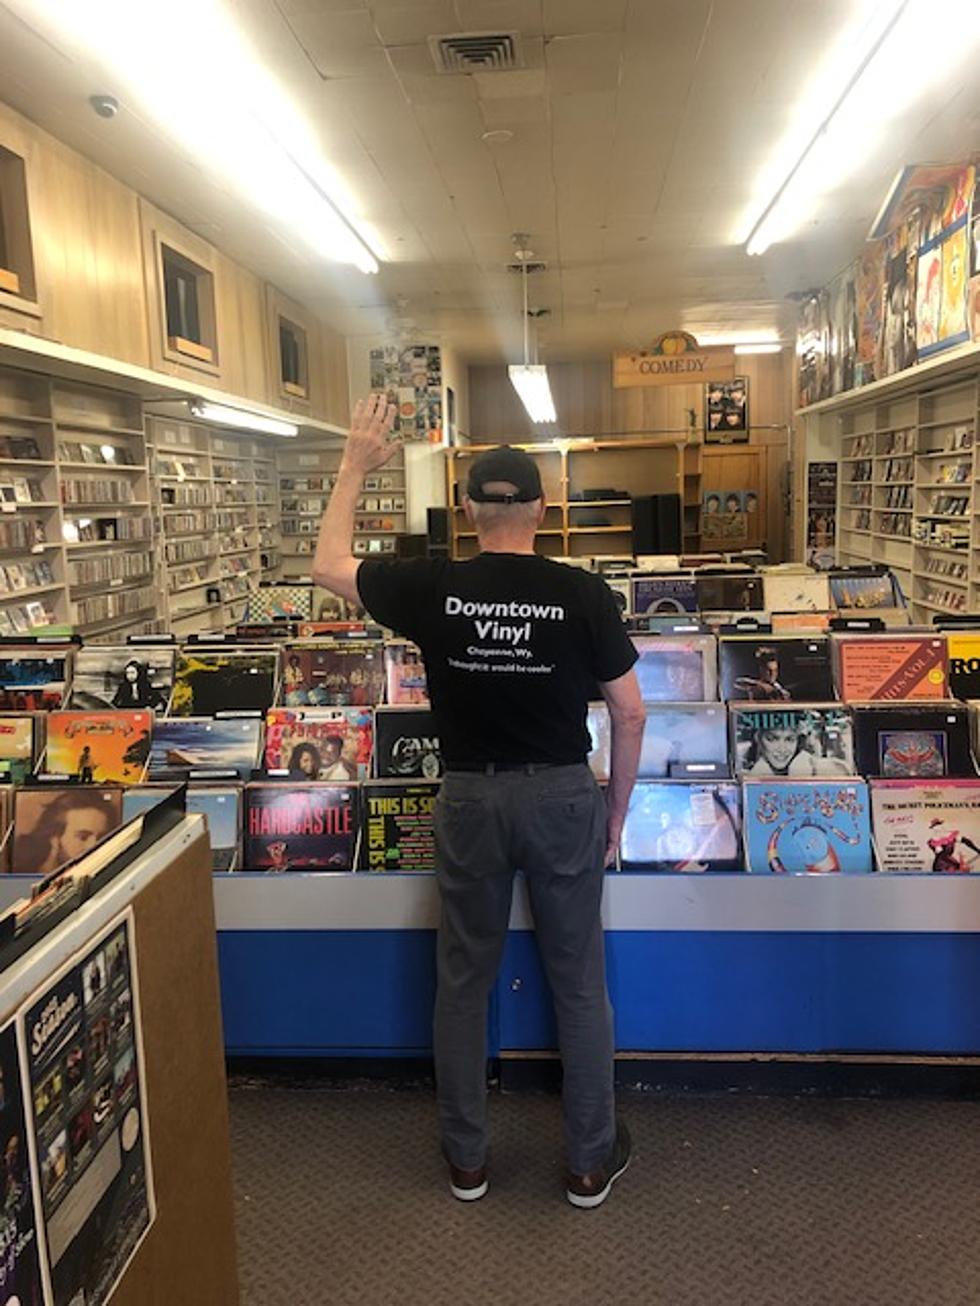 We Will Miss You Don! Cheyenne's Downtown Vinyl Has A New Owner